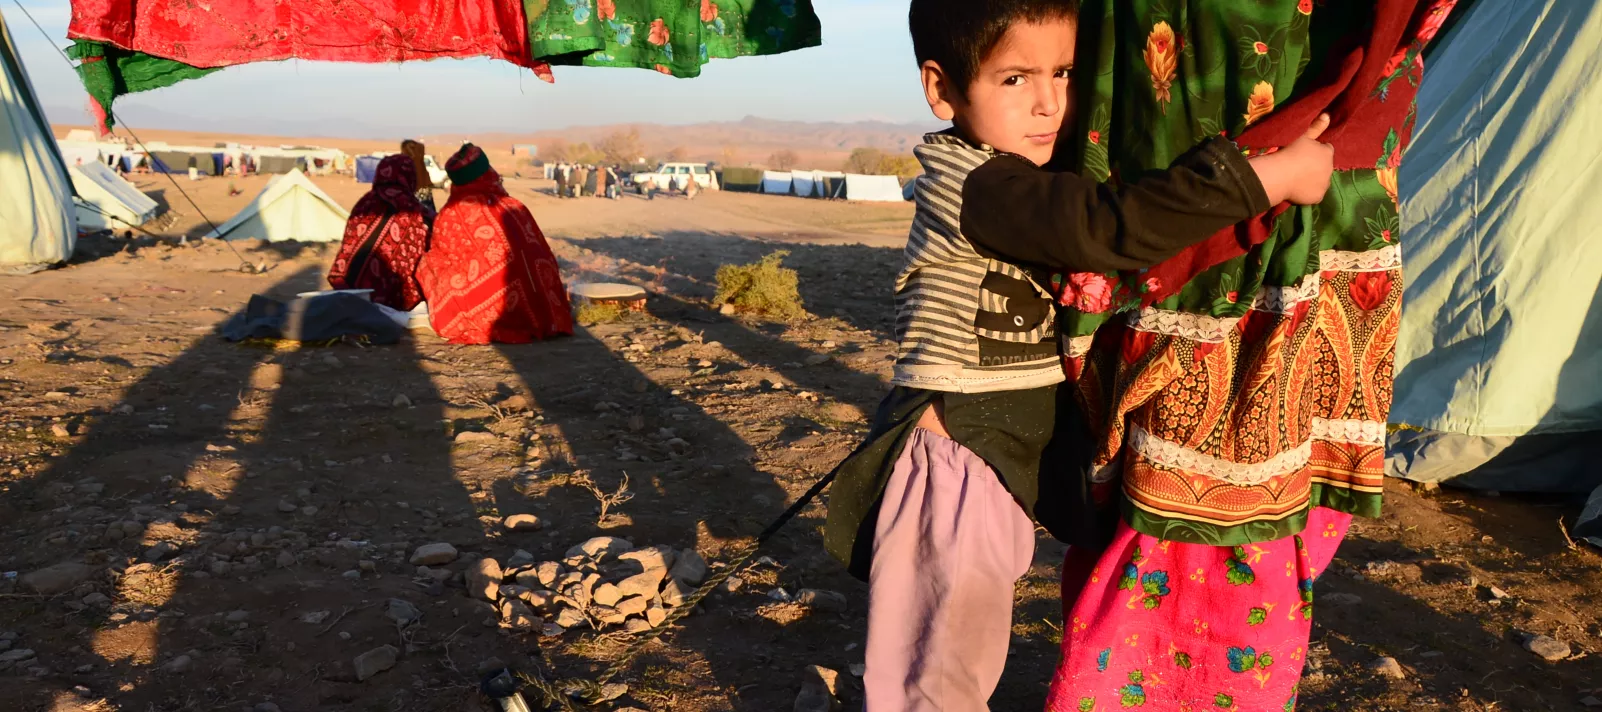 A displaced boy looks on while holding his mother in an IDP camp in Herat province of Afghanistan